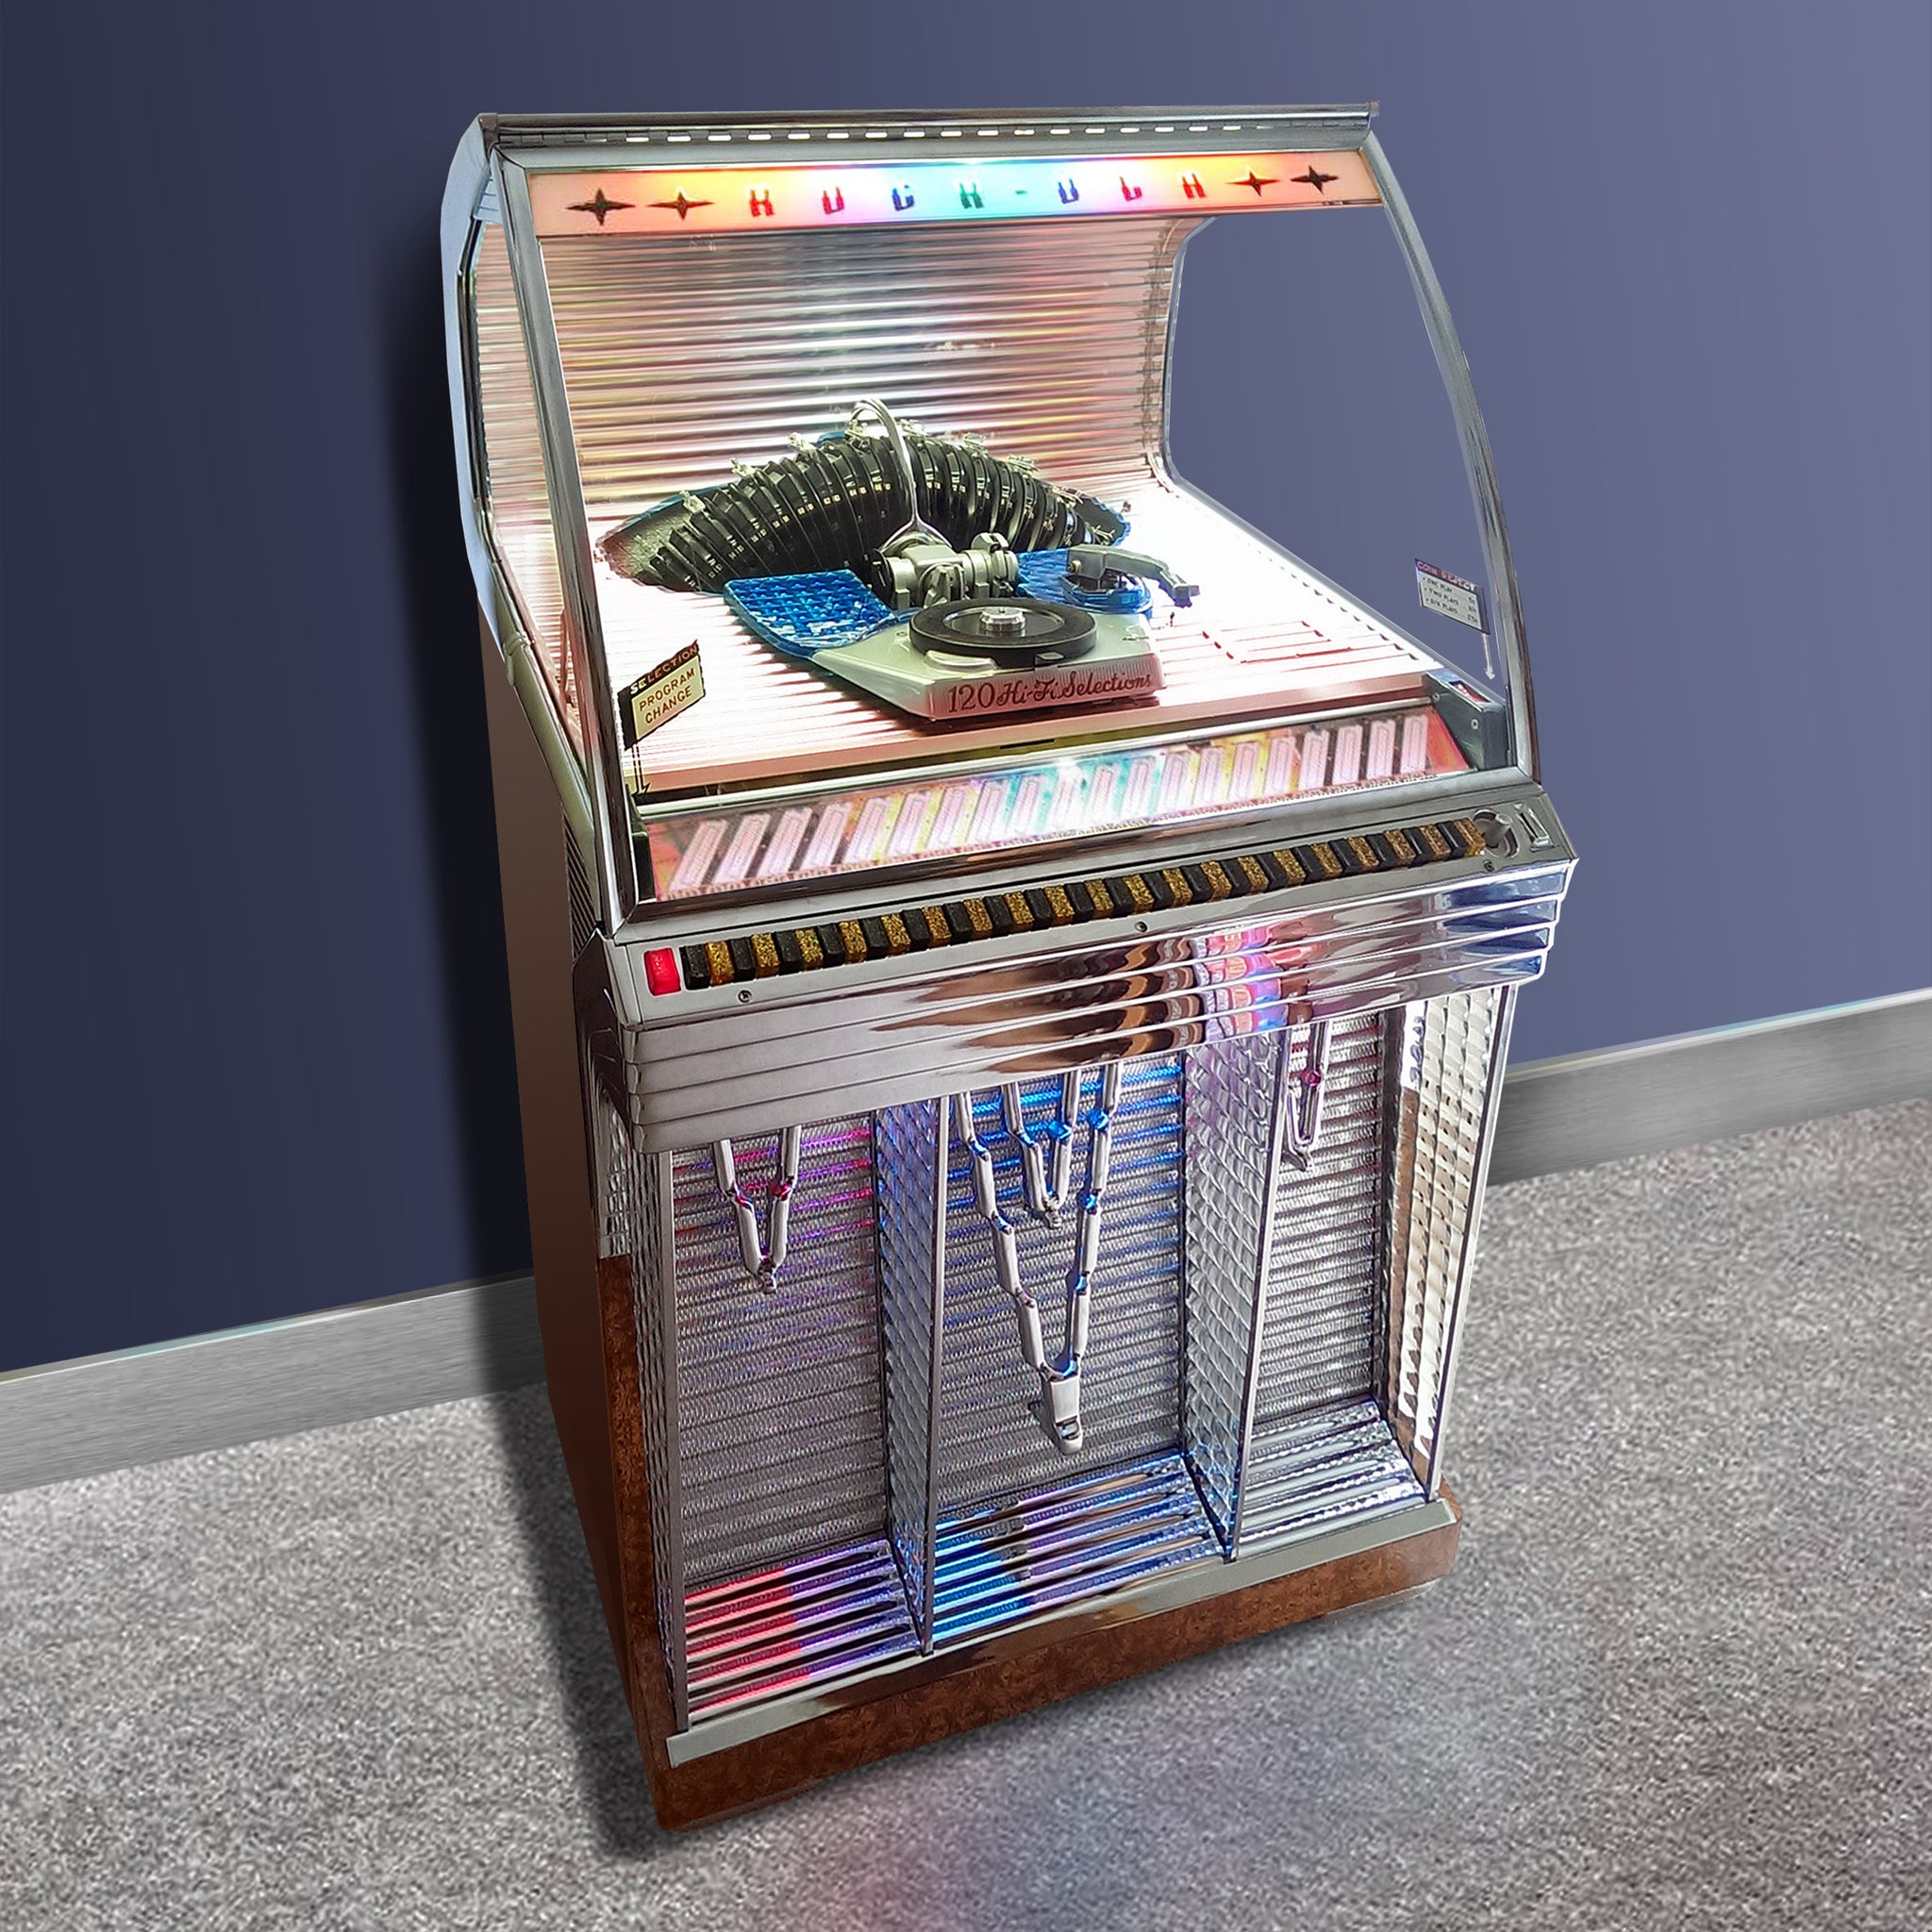 The 1955 Rock Ola 1448 120 selection Jukebox - Coming soon